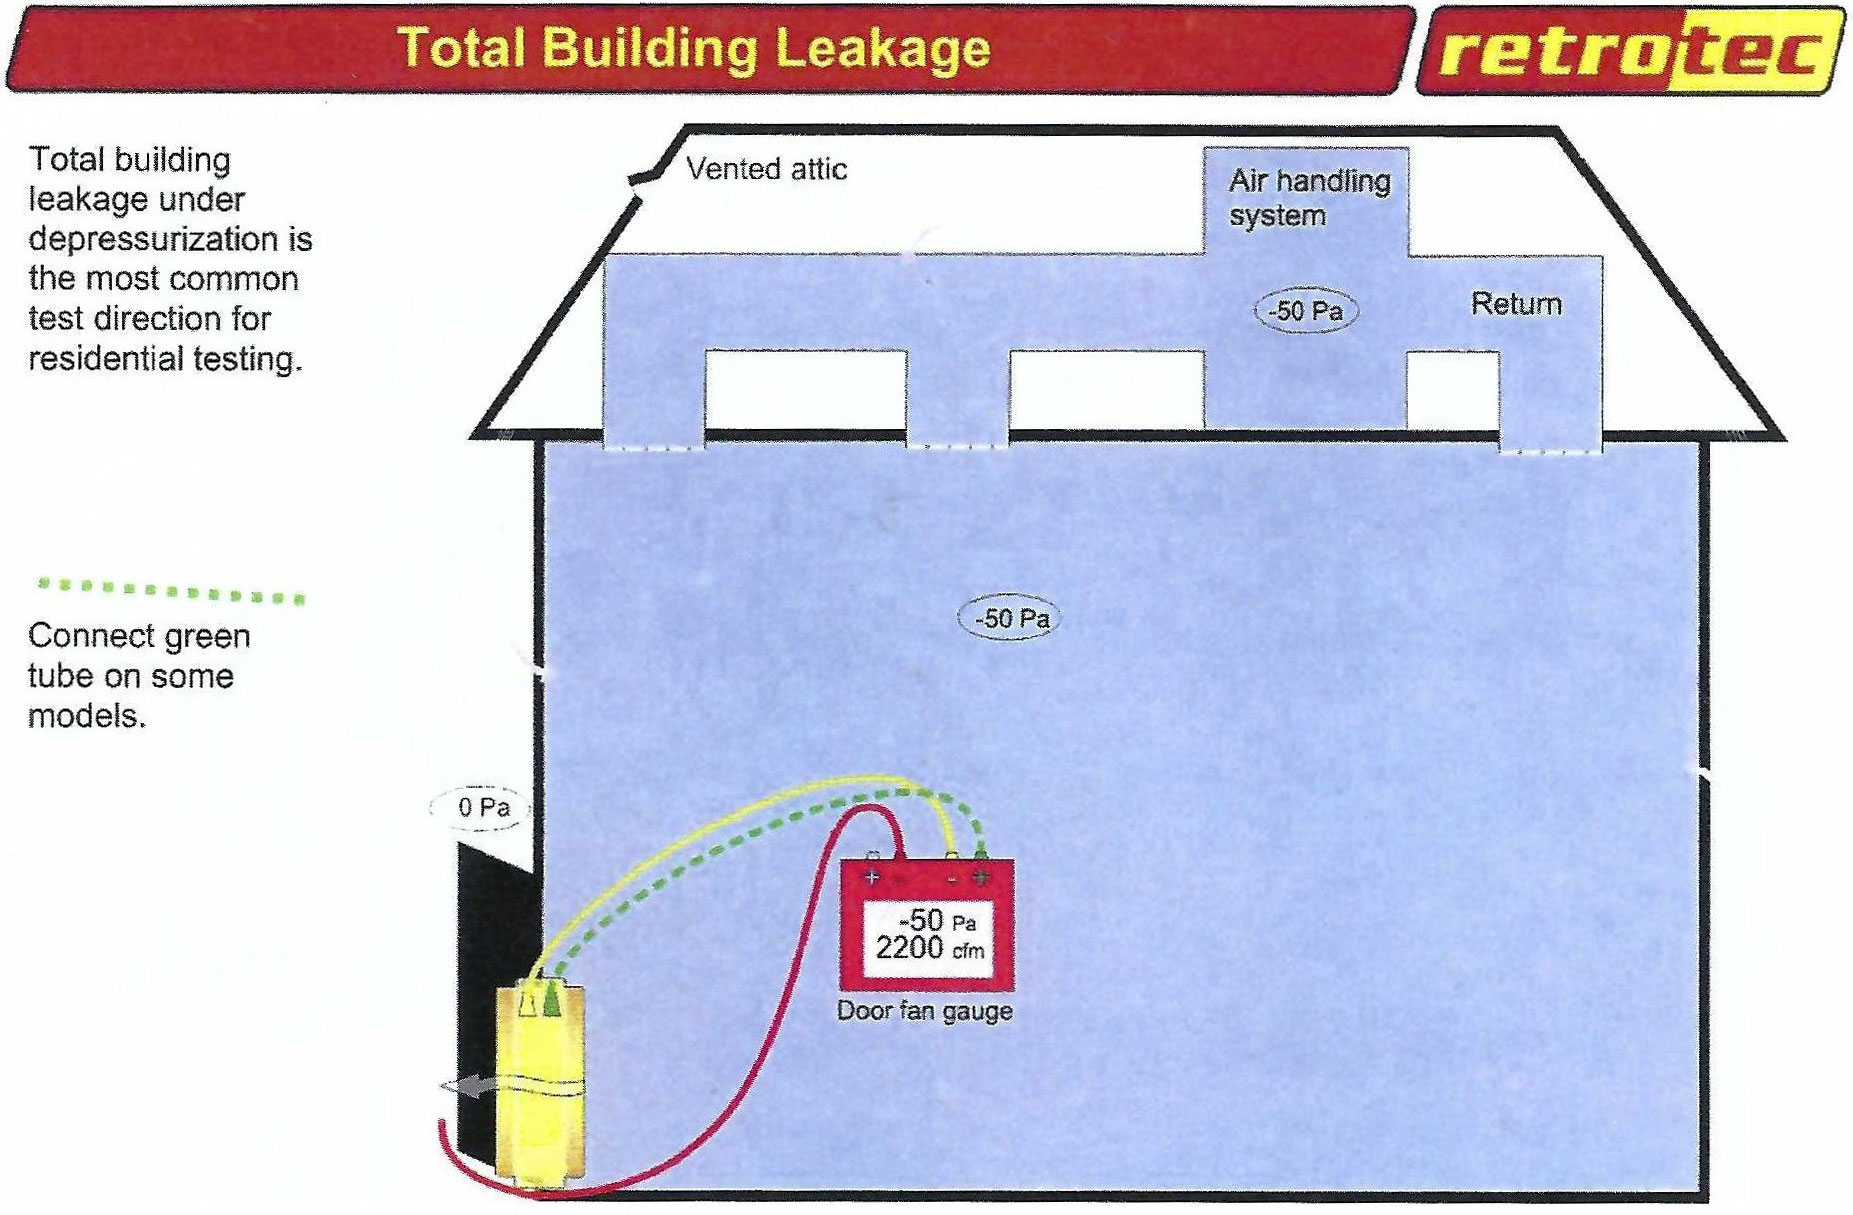 Total Building Leakage Example